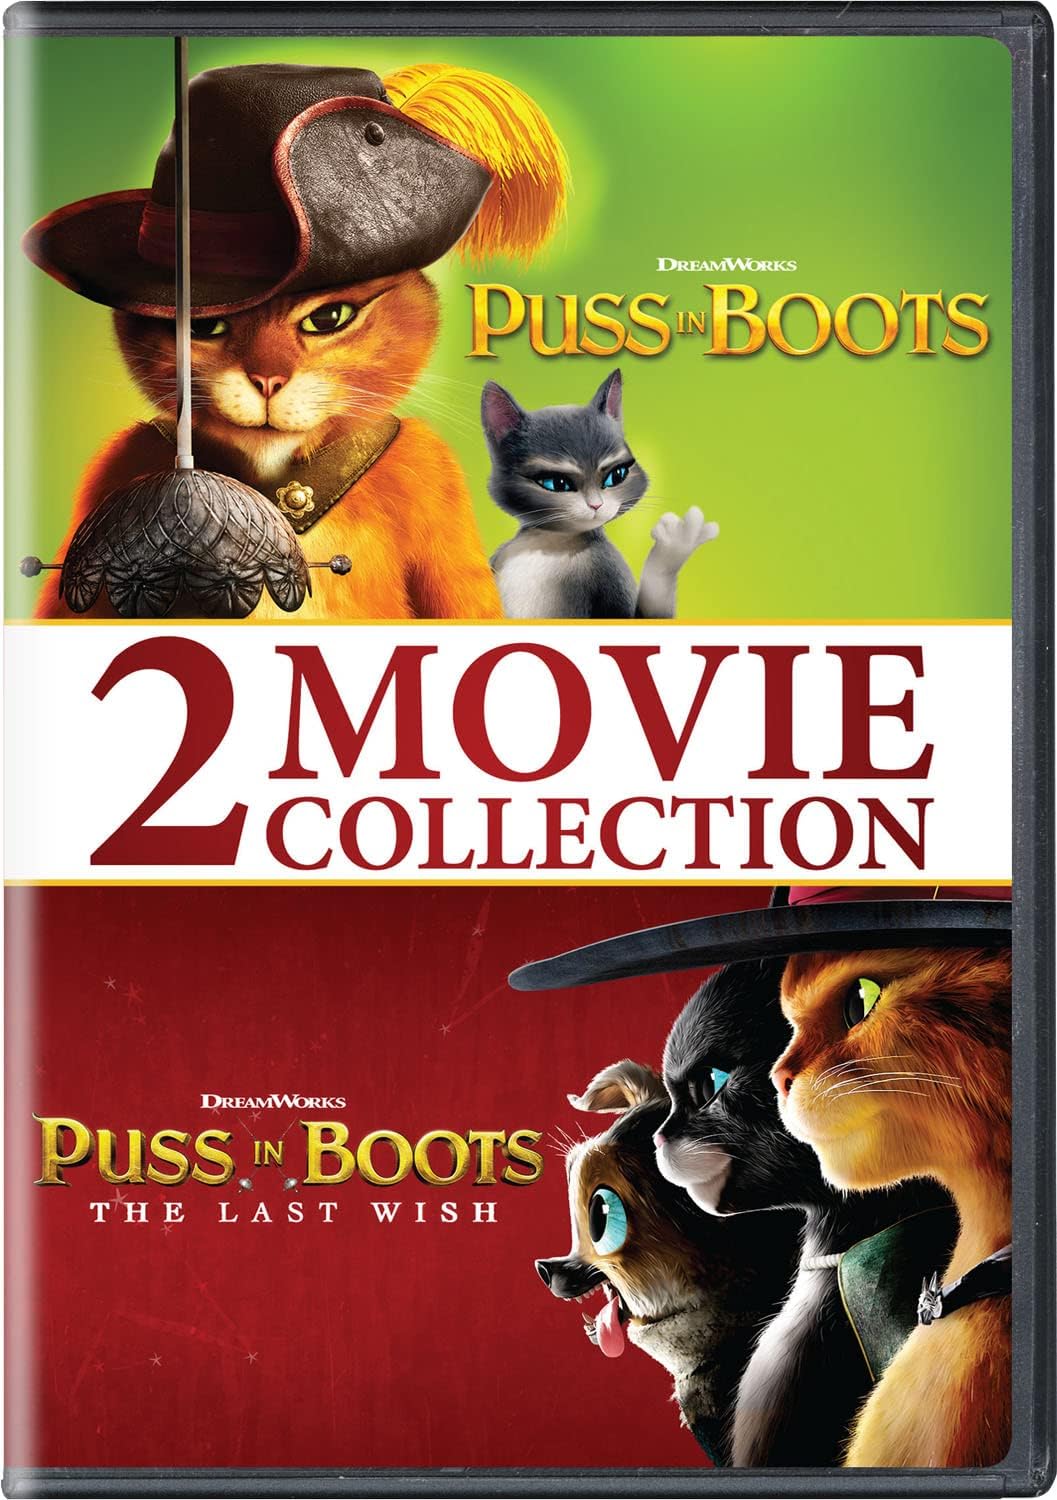 Puss in Boots movie